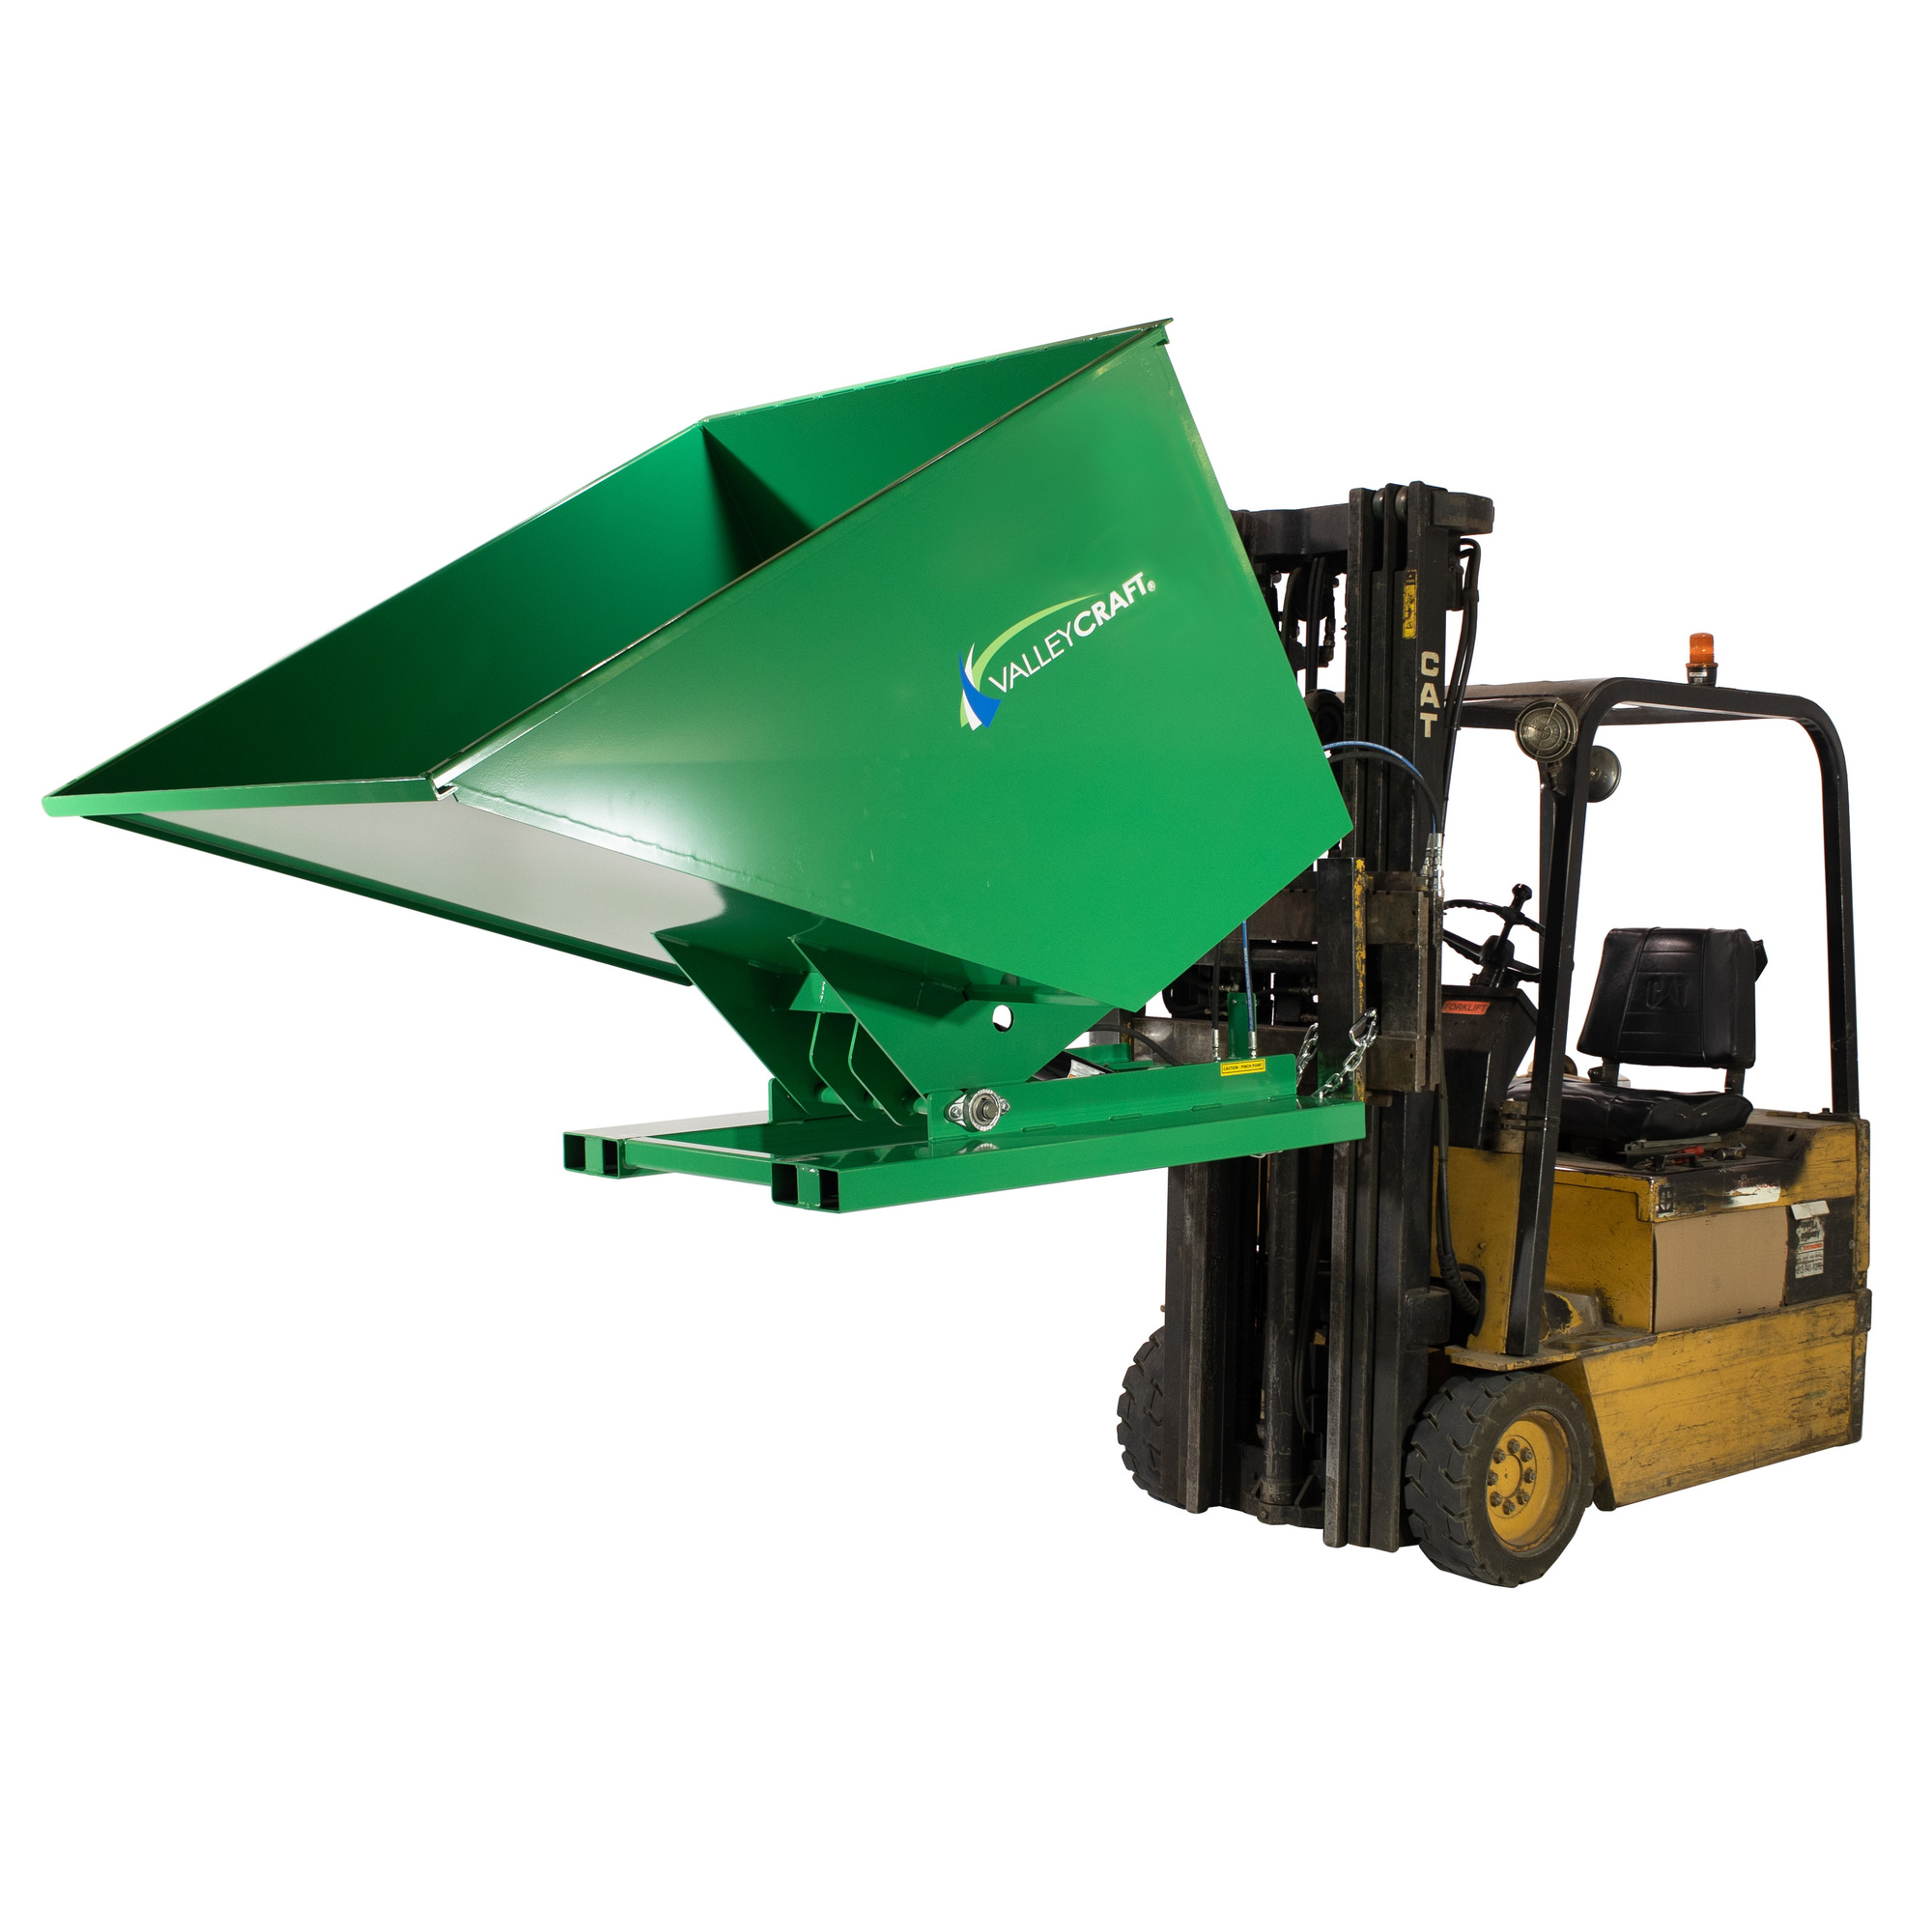 Valley Craft, Powered Self-Dumping Hopper Forklift Attachment, Capacity 2000 lb, Volume 2 ydÂ³, Color Green, Model F89141